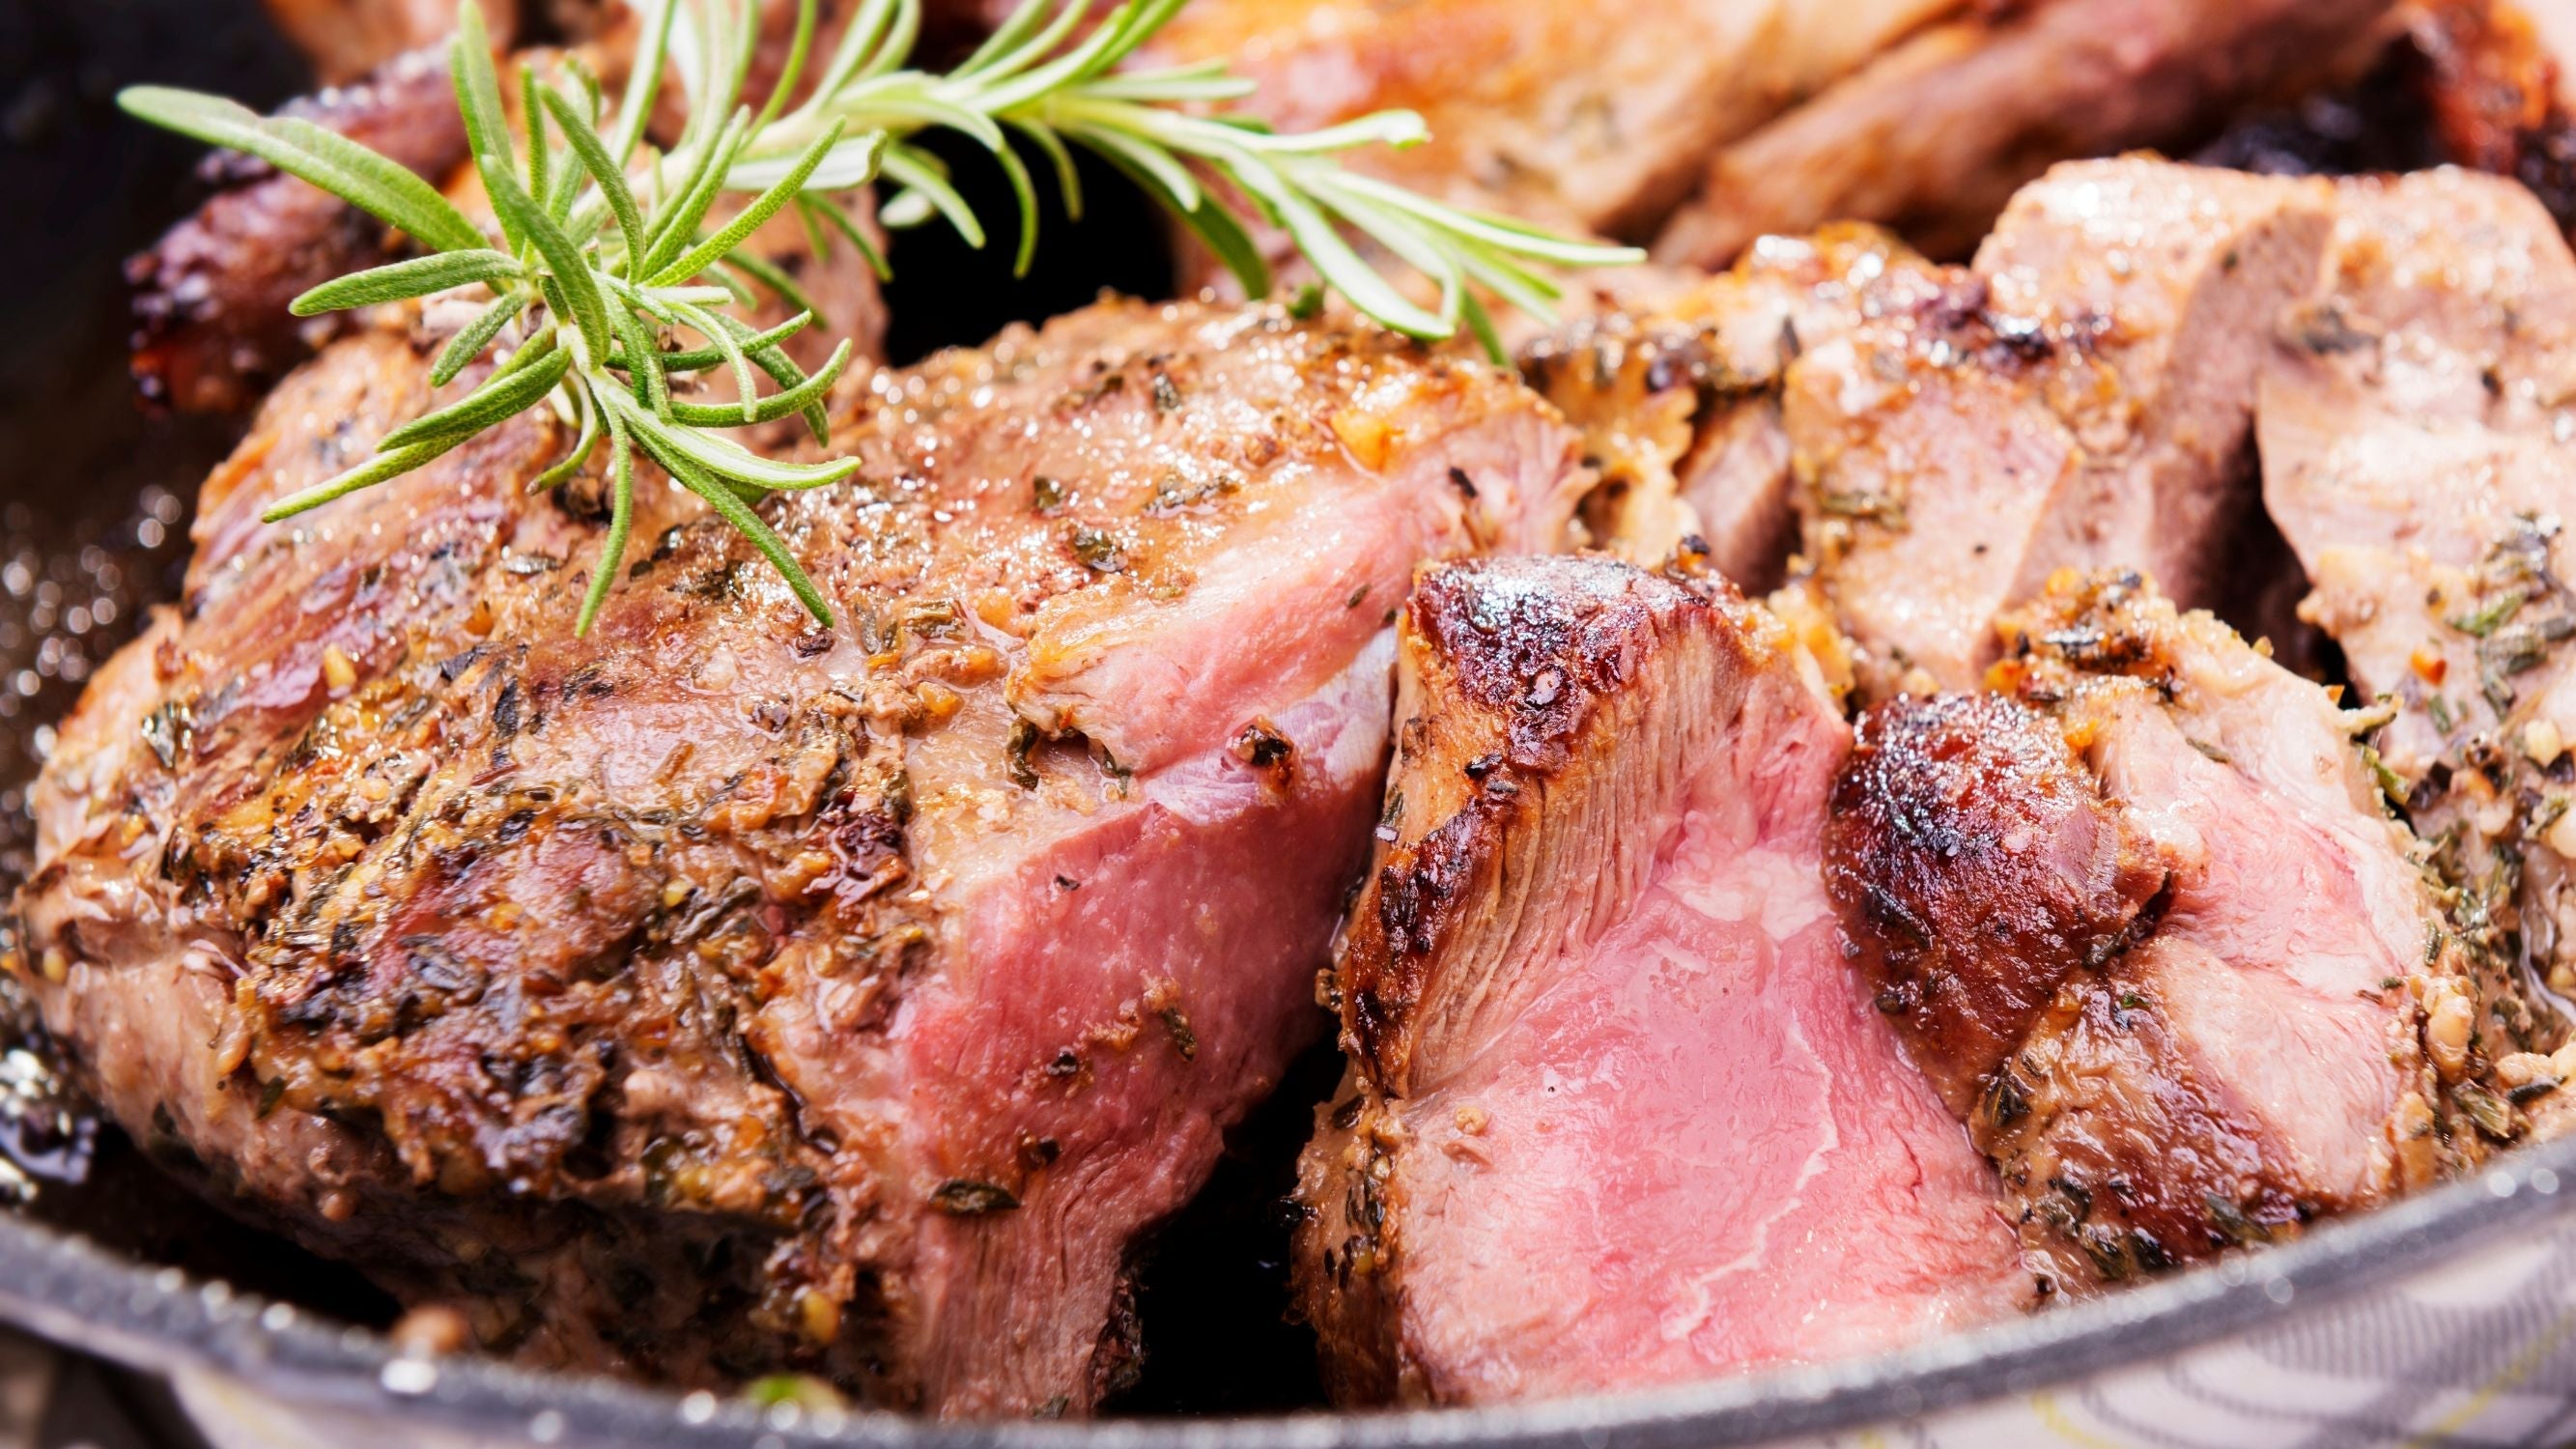 Shop 10+ Premium Lamb Cuts at Meat King - Experience Elegant Dining Today